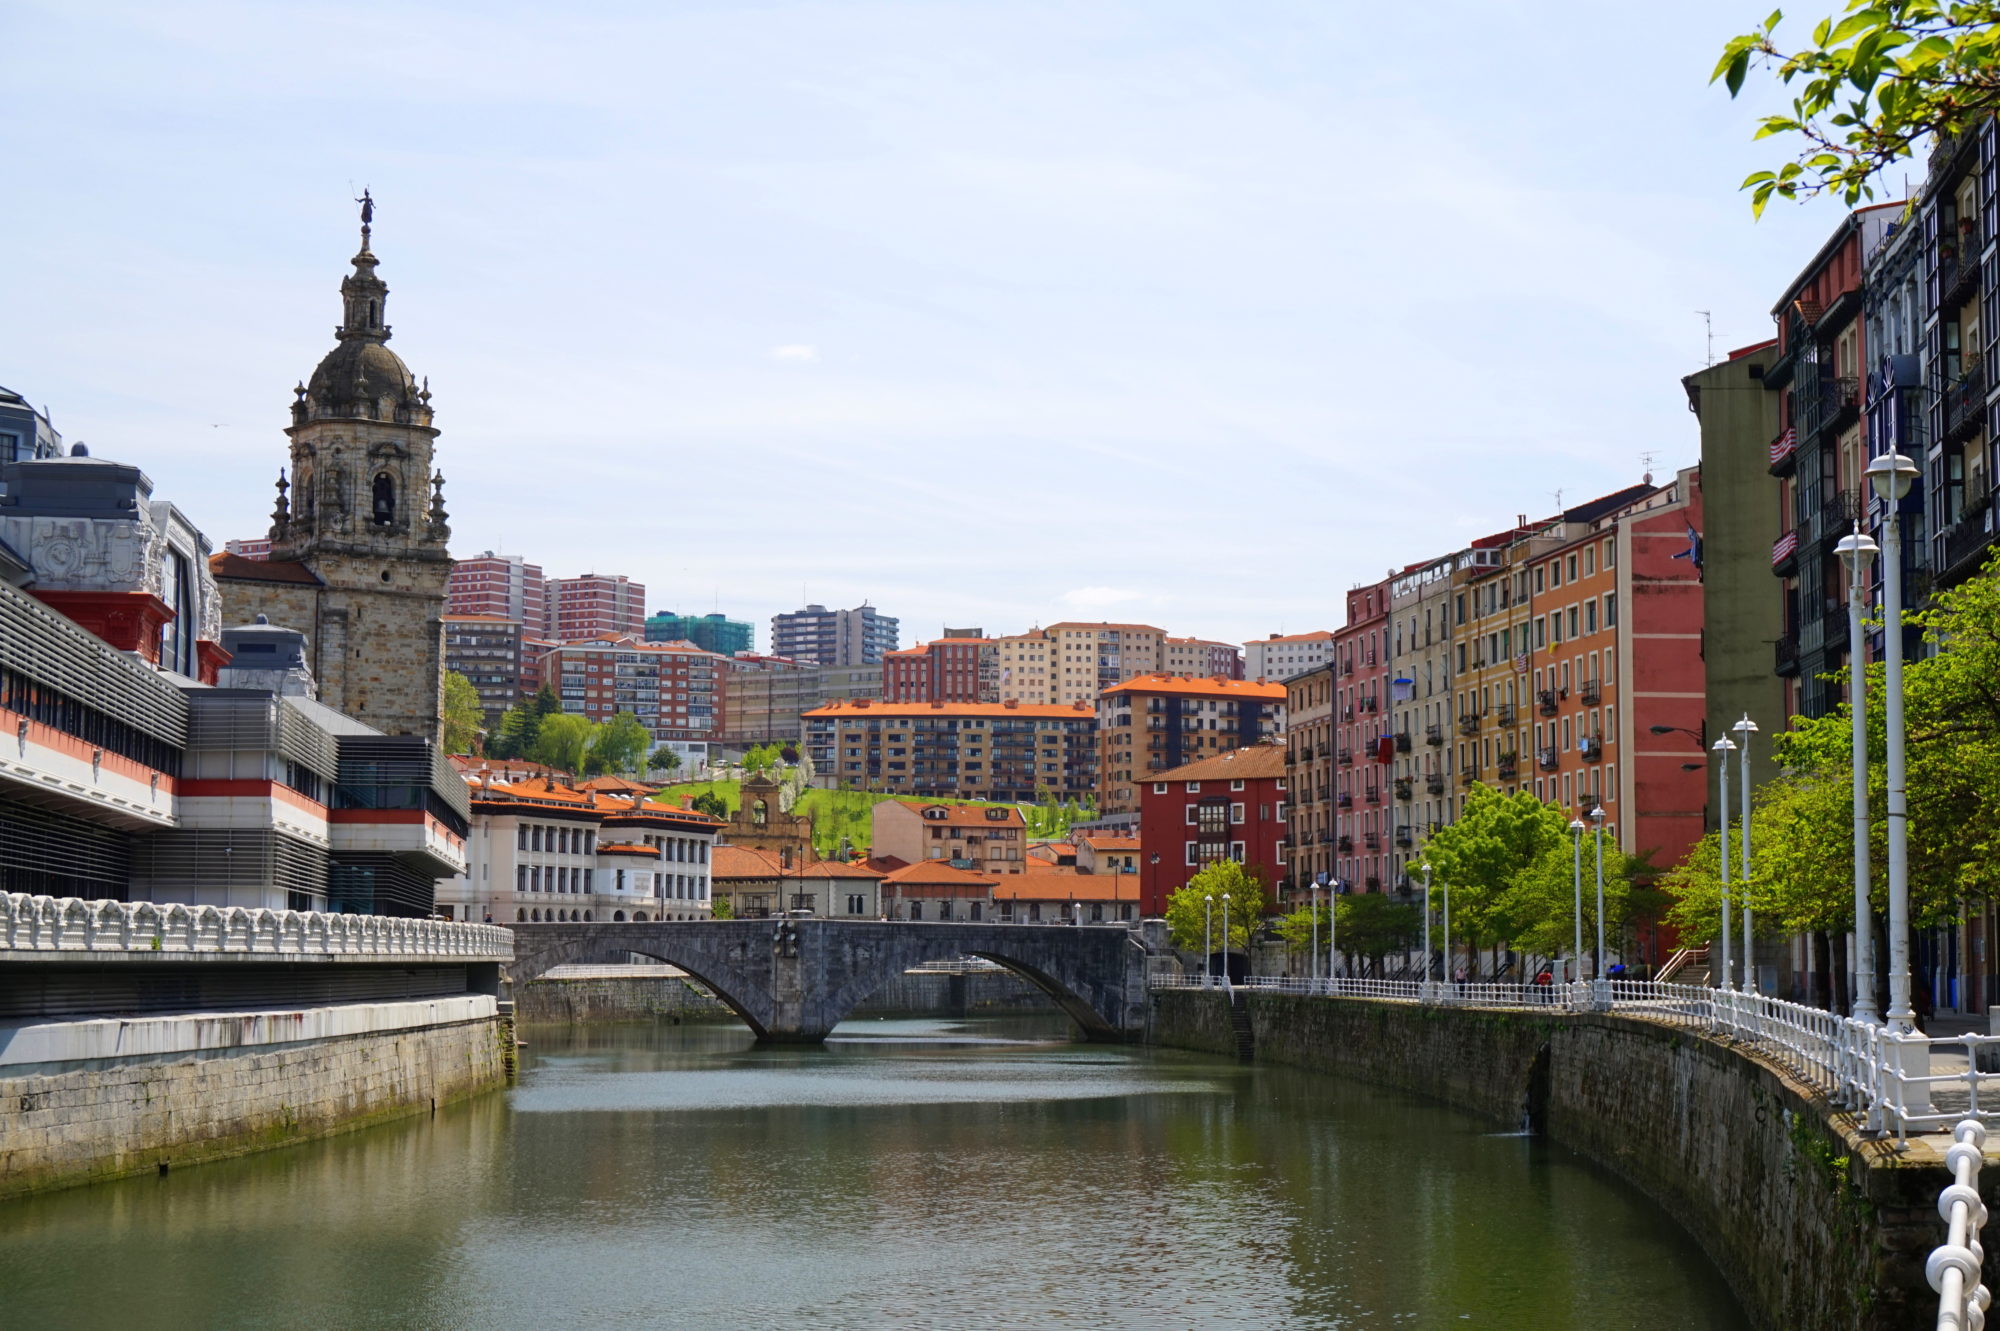 Regional capital Bilbao is number one on our list of the best day trips from San Sebastian!